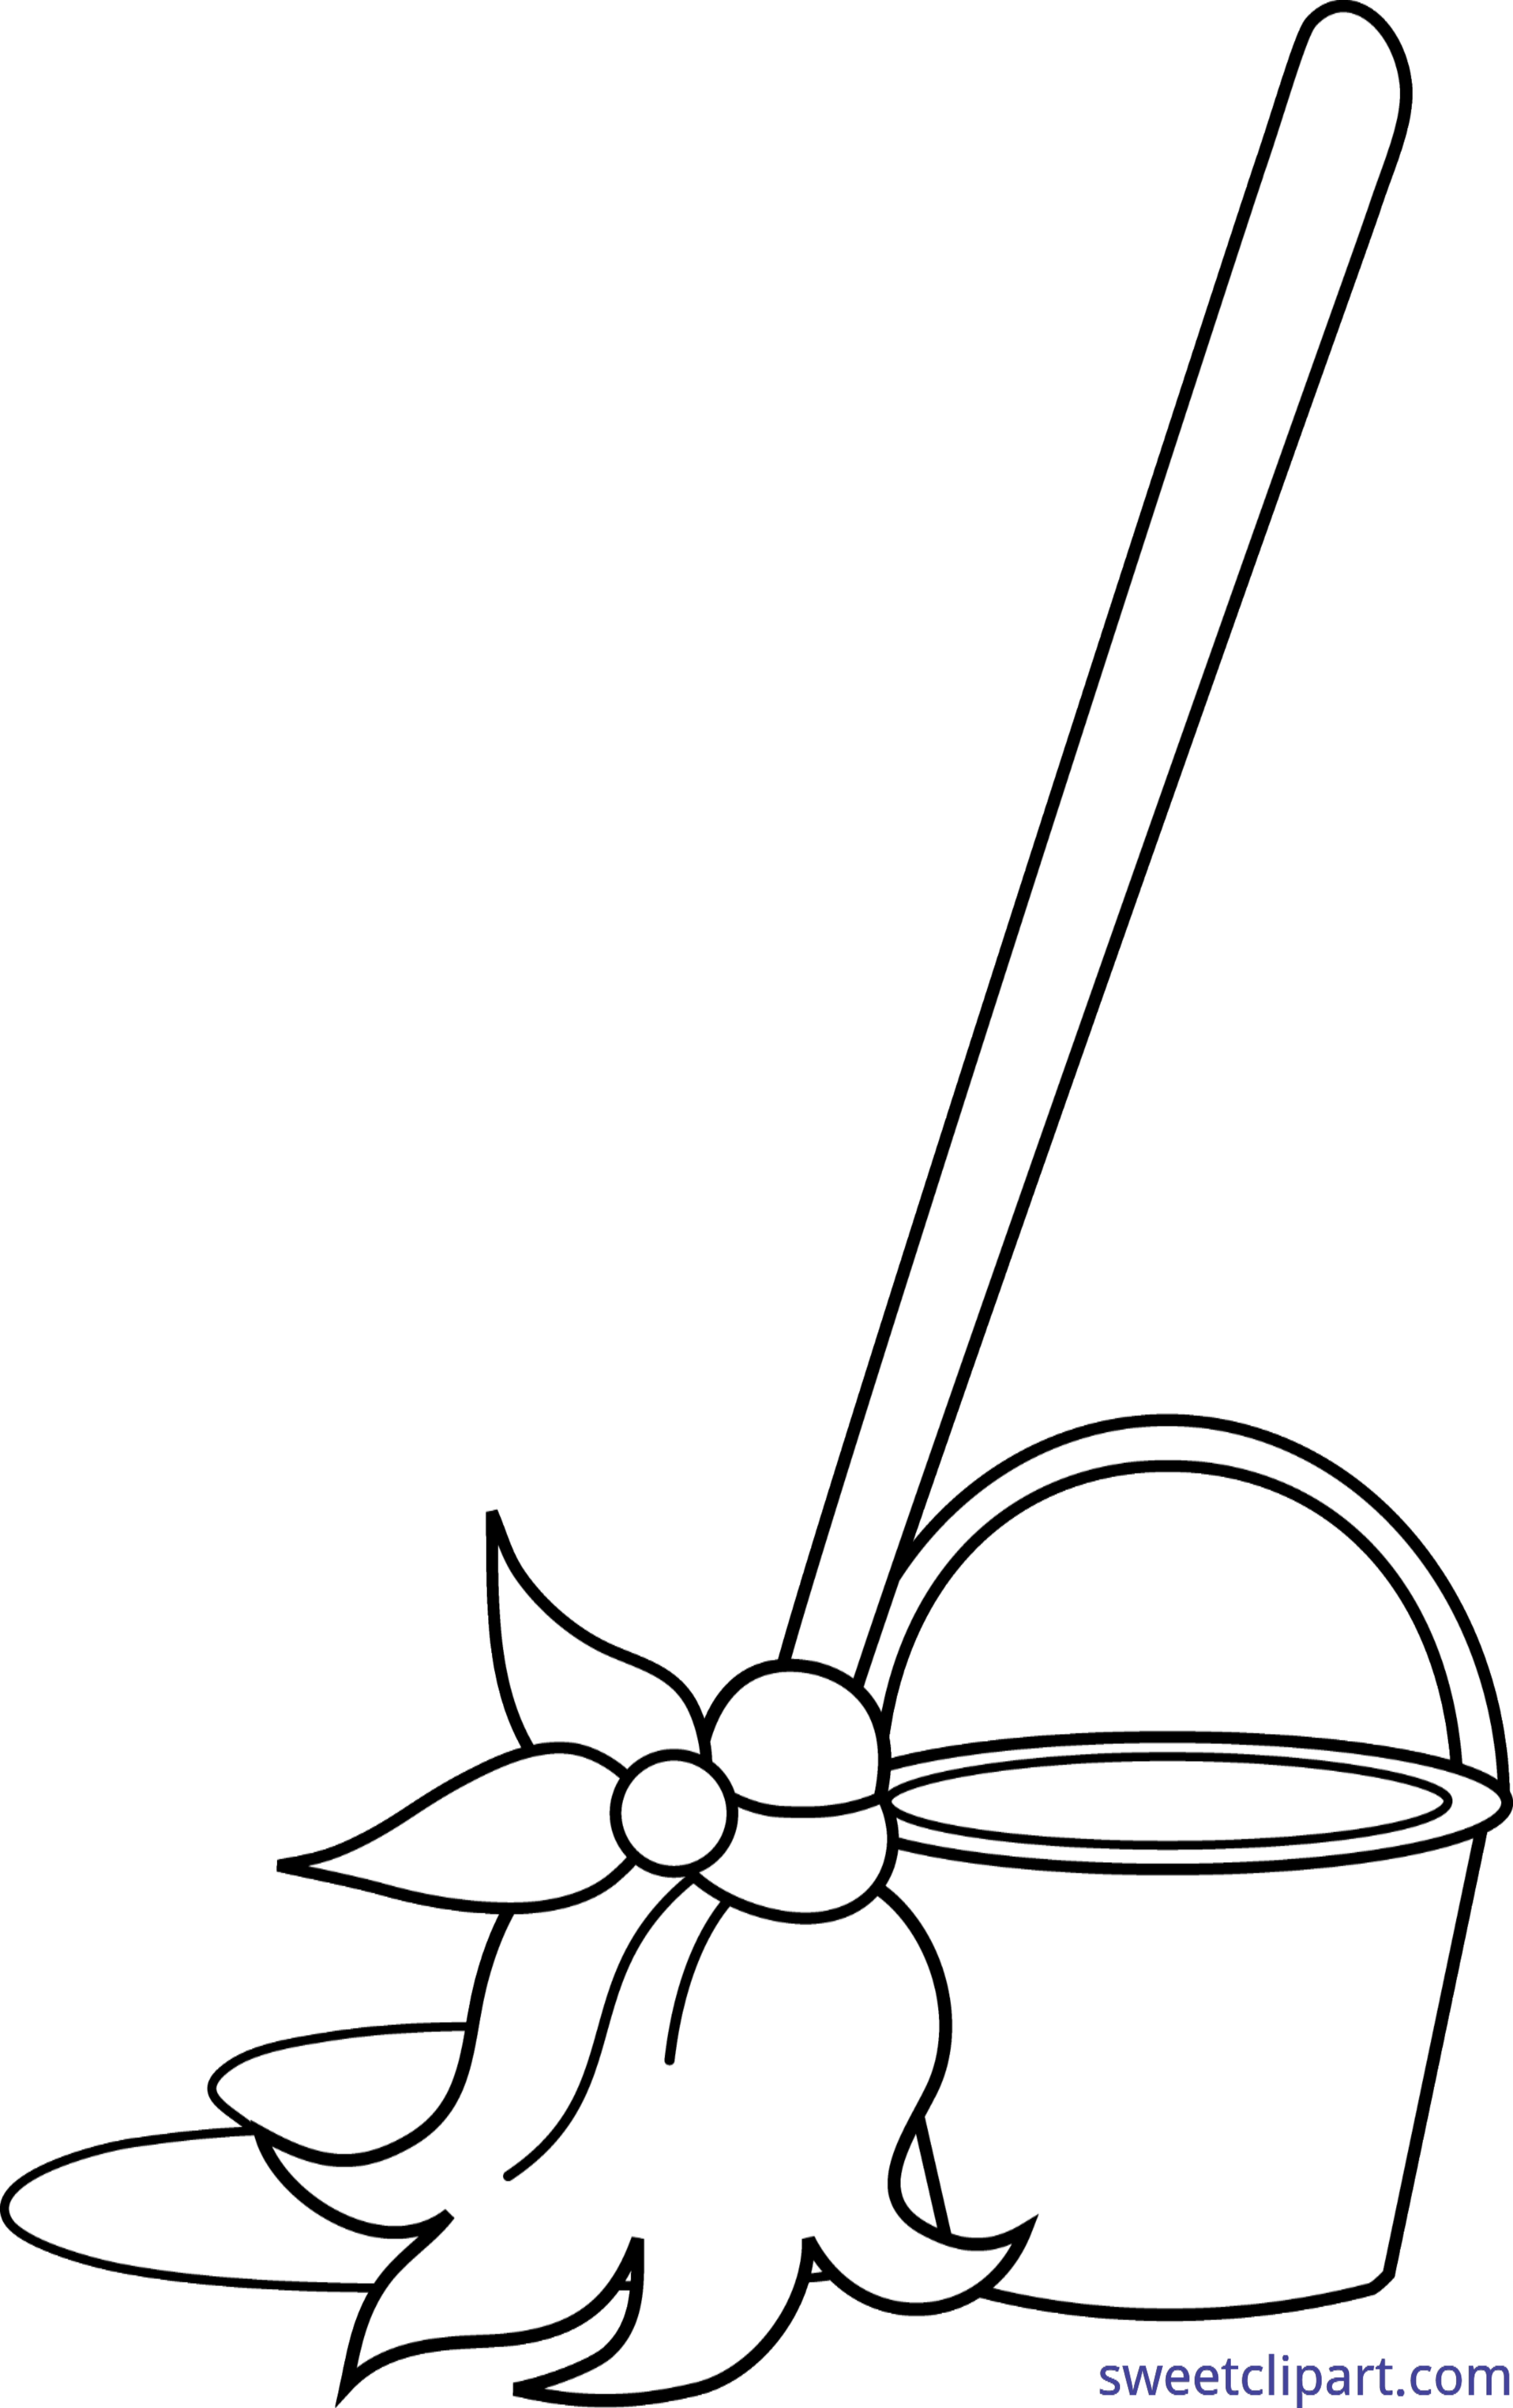 Clipart hammer medical. Mop bucket coloring page